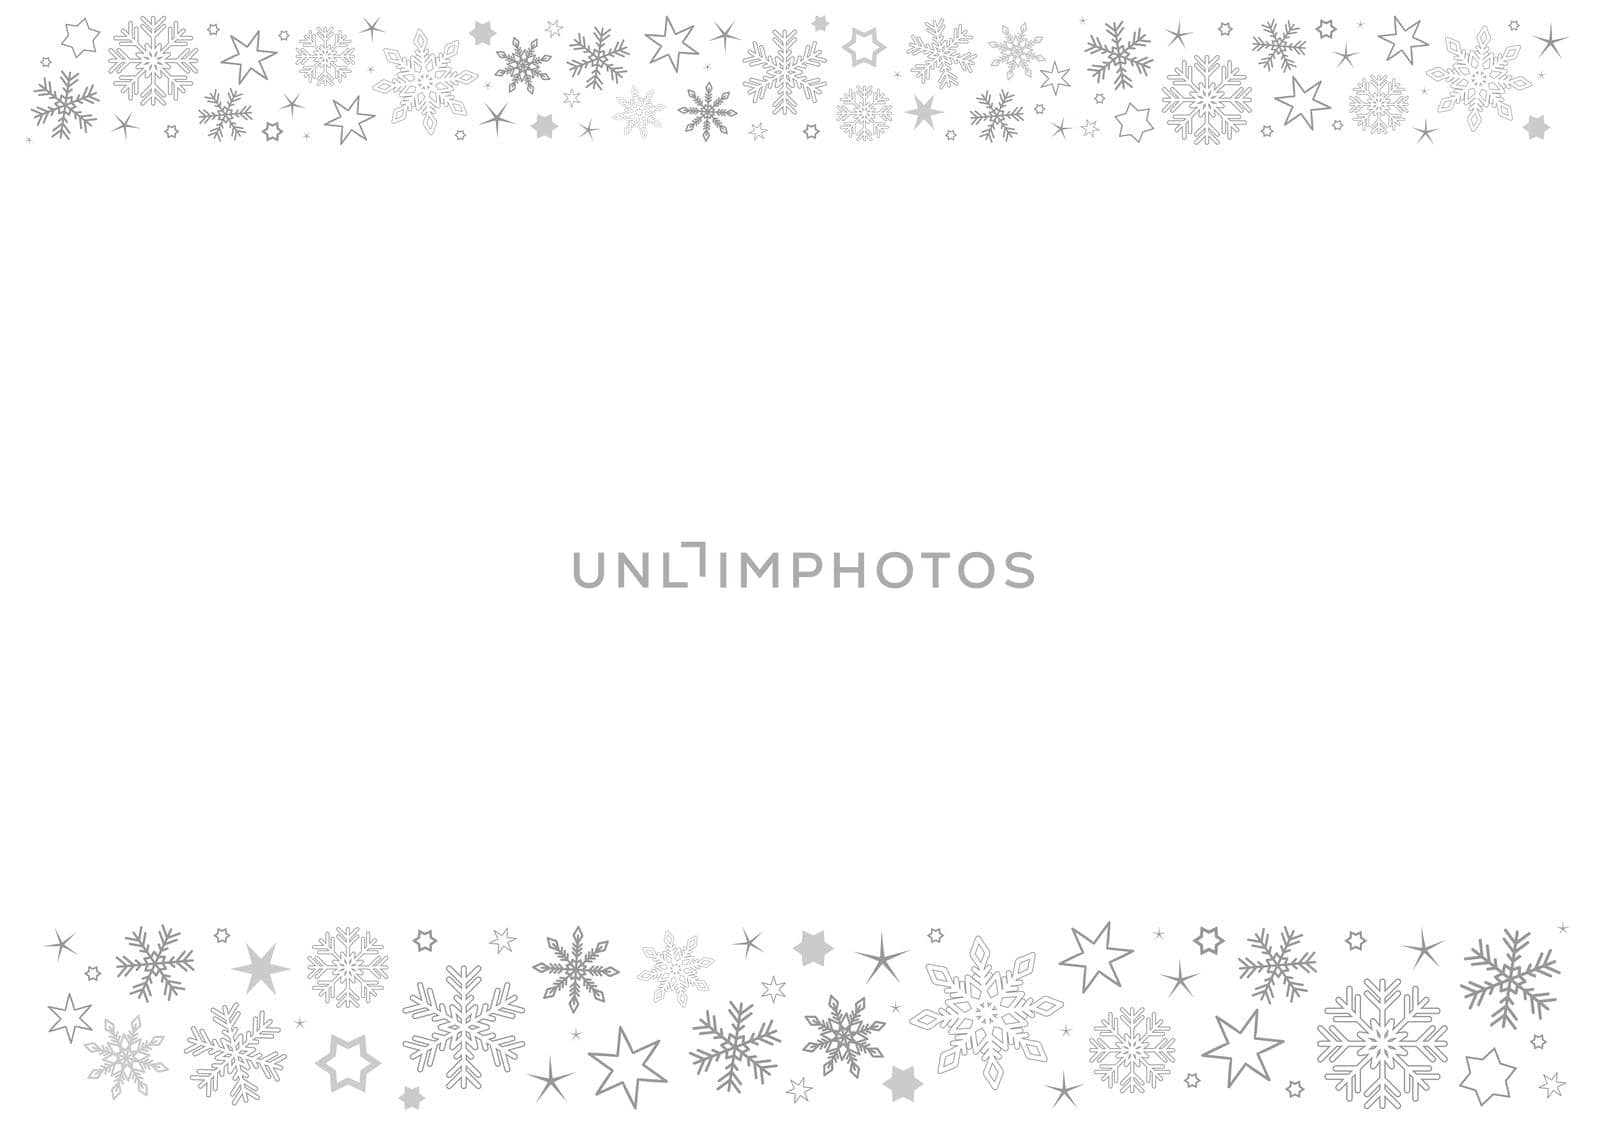 The blank horizontal white paper background with gray winter snowflakes header and footer